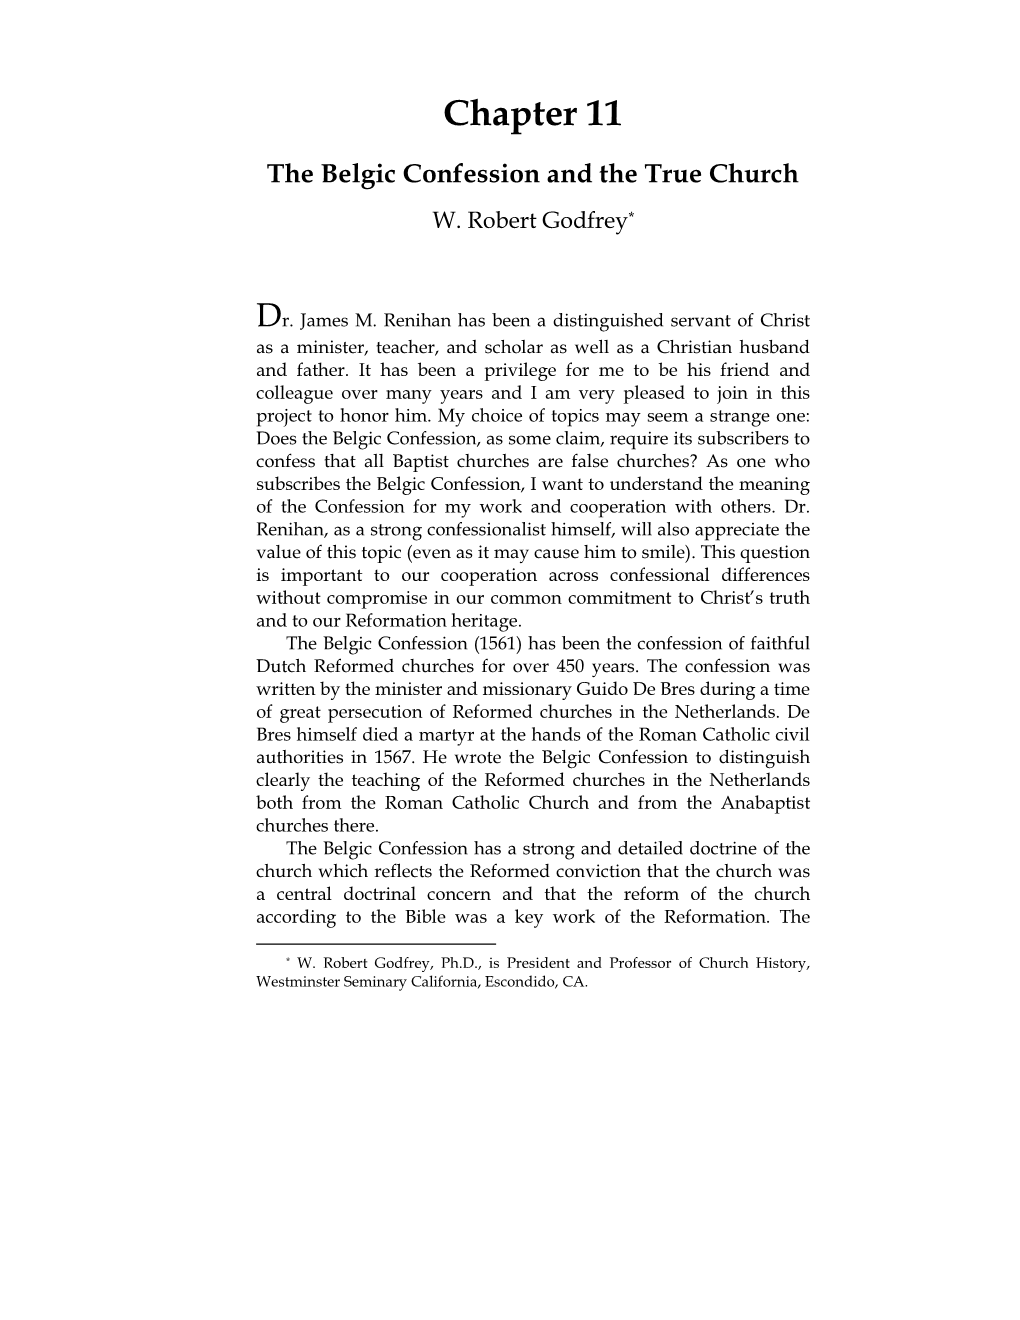 The Belgic Confession and the True Church W